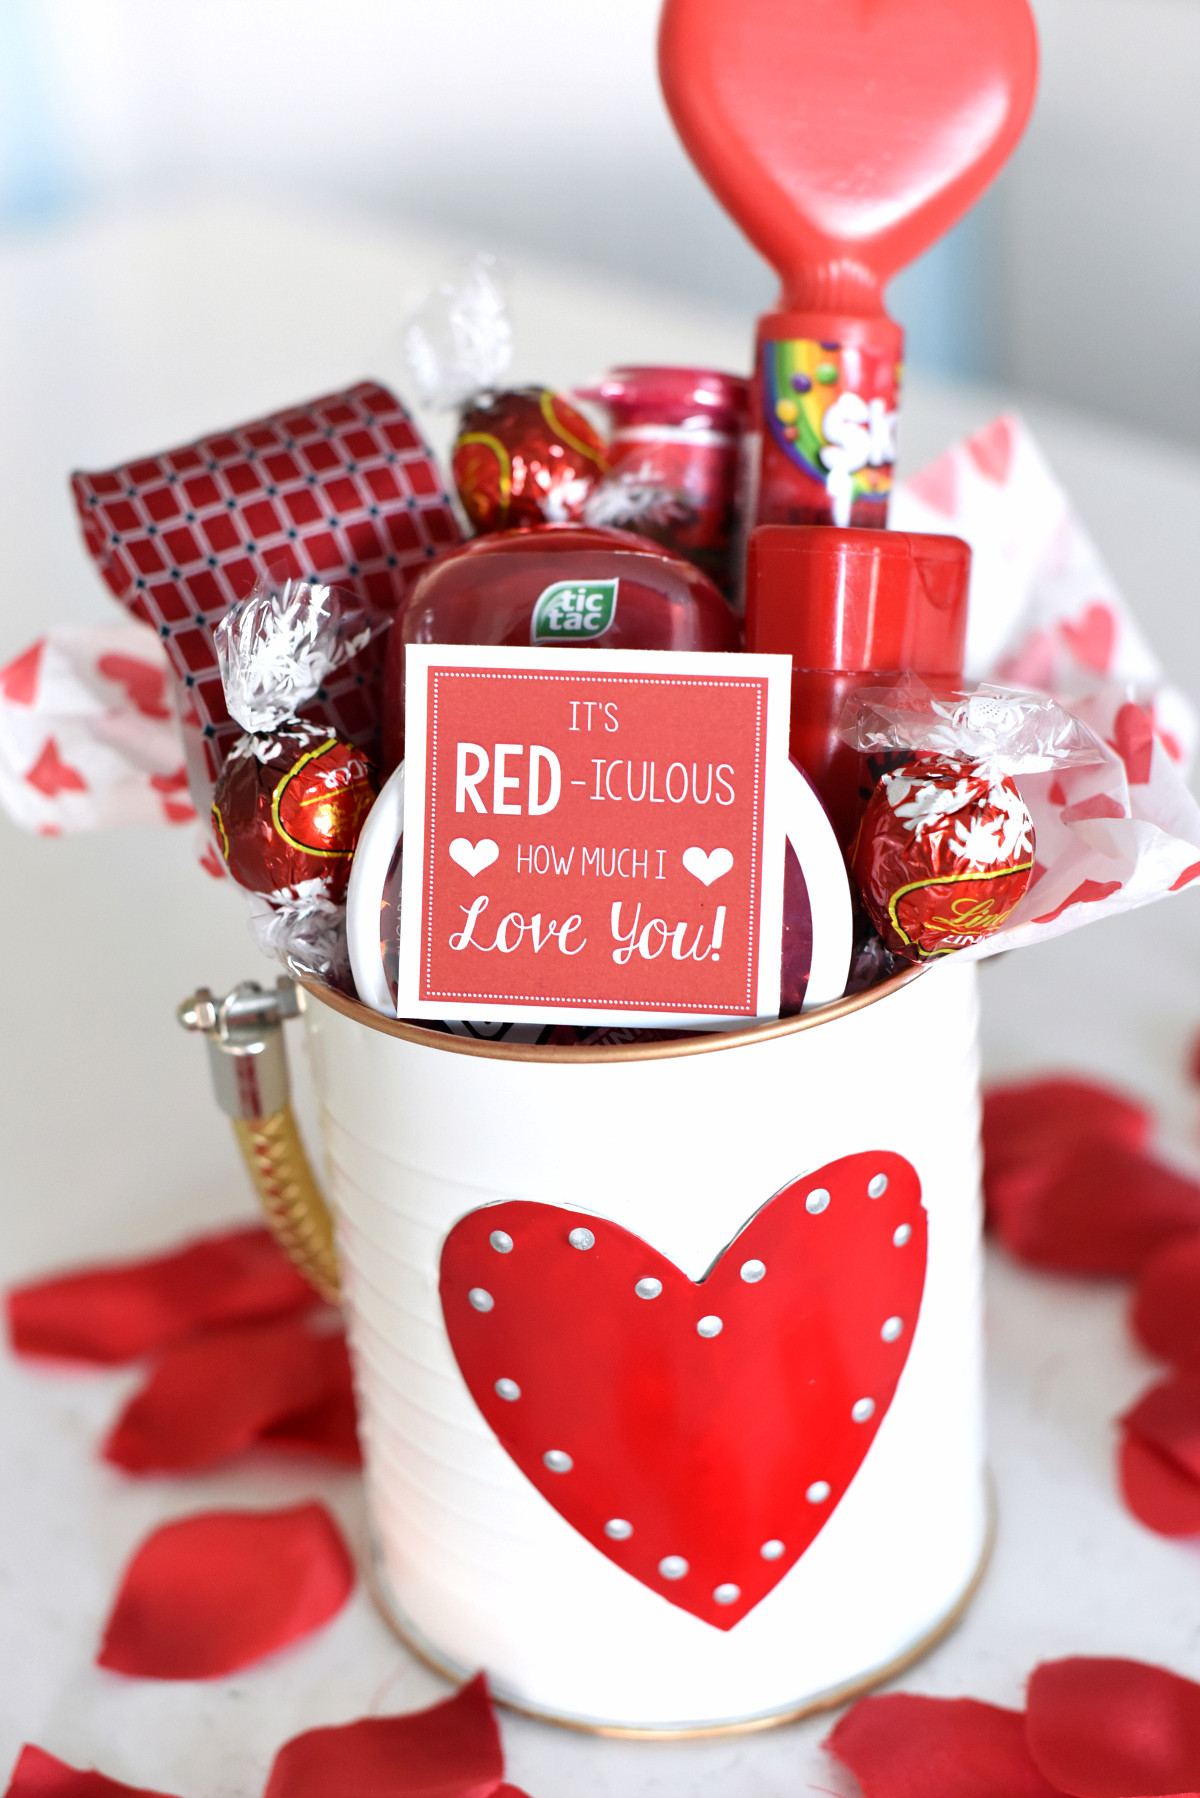 Good Valentines Day Gift Ideas For Her
 Cute Valentine s Day Gift Idea RED iculous Basket